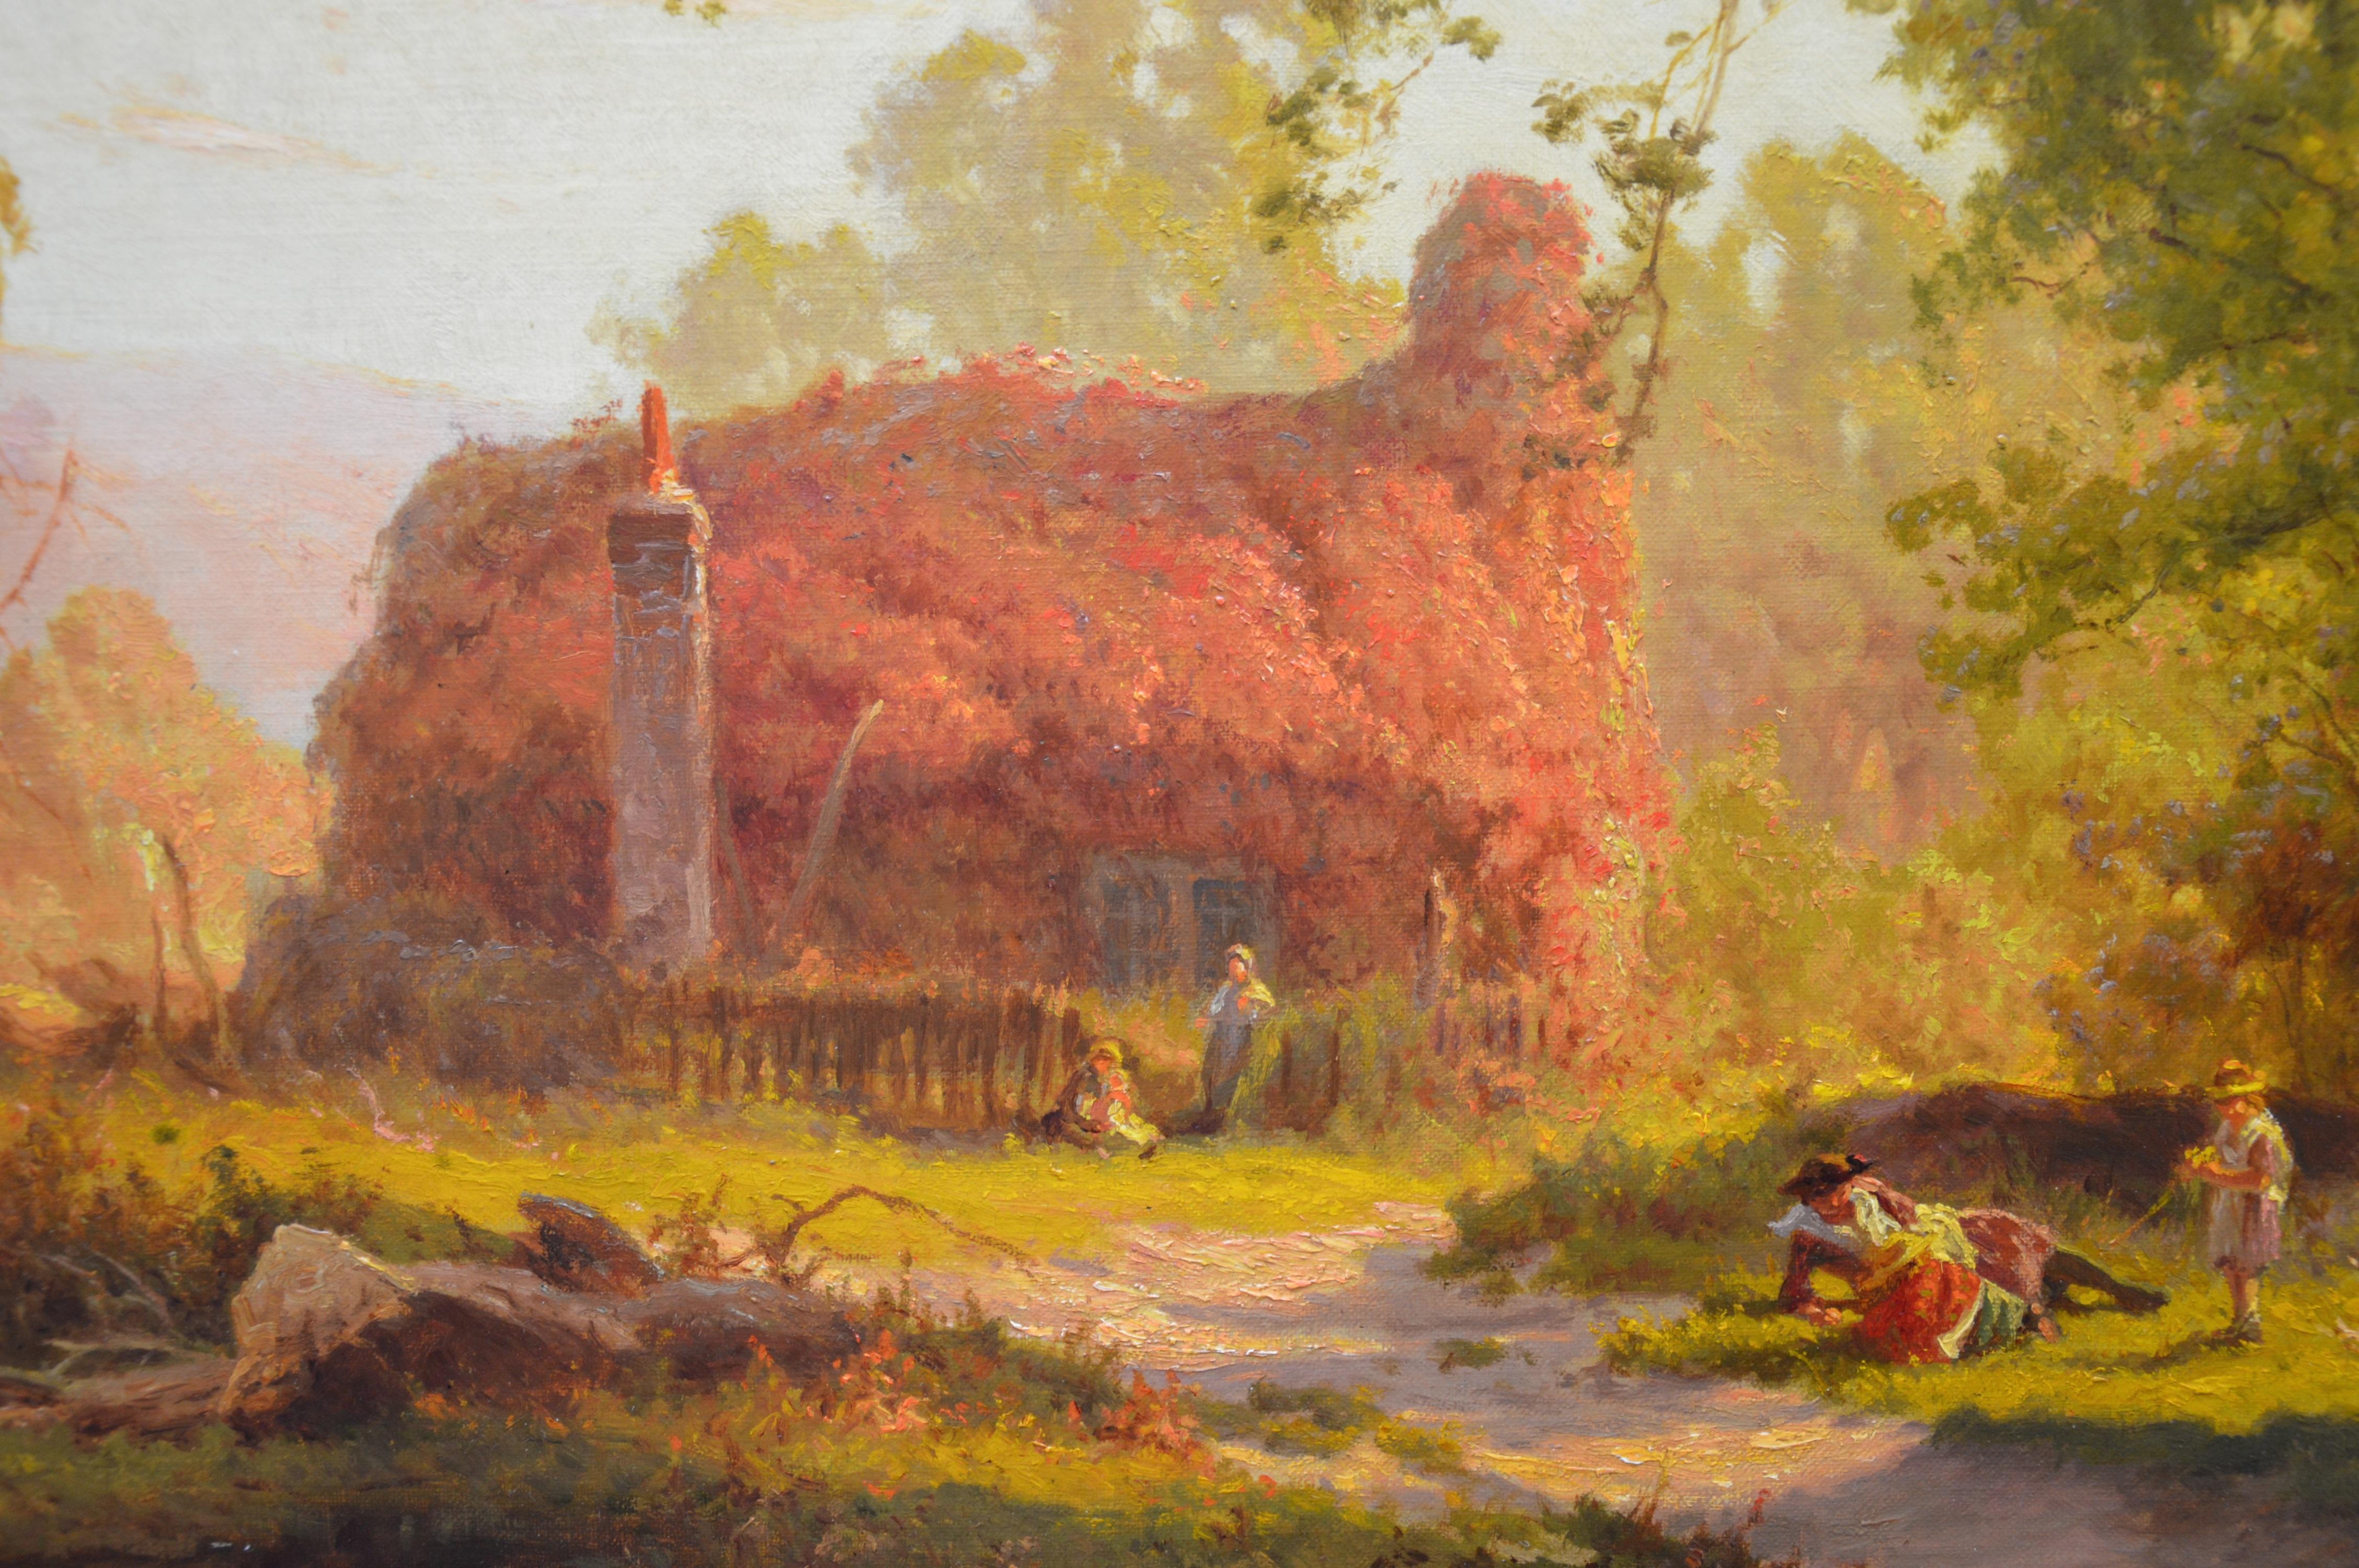 A fine 19th century oil on canvas depicting a mother and two young children playing before a woodland cottage covered in ‘Virginia Creeper’ by the distinguished English landscape painter Edward Henry Holder (1847-1922). The painting is signed by the